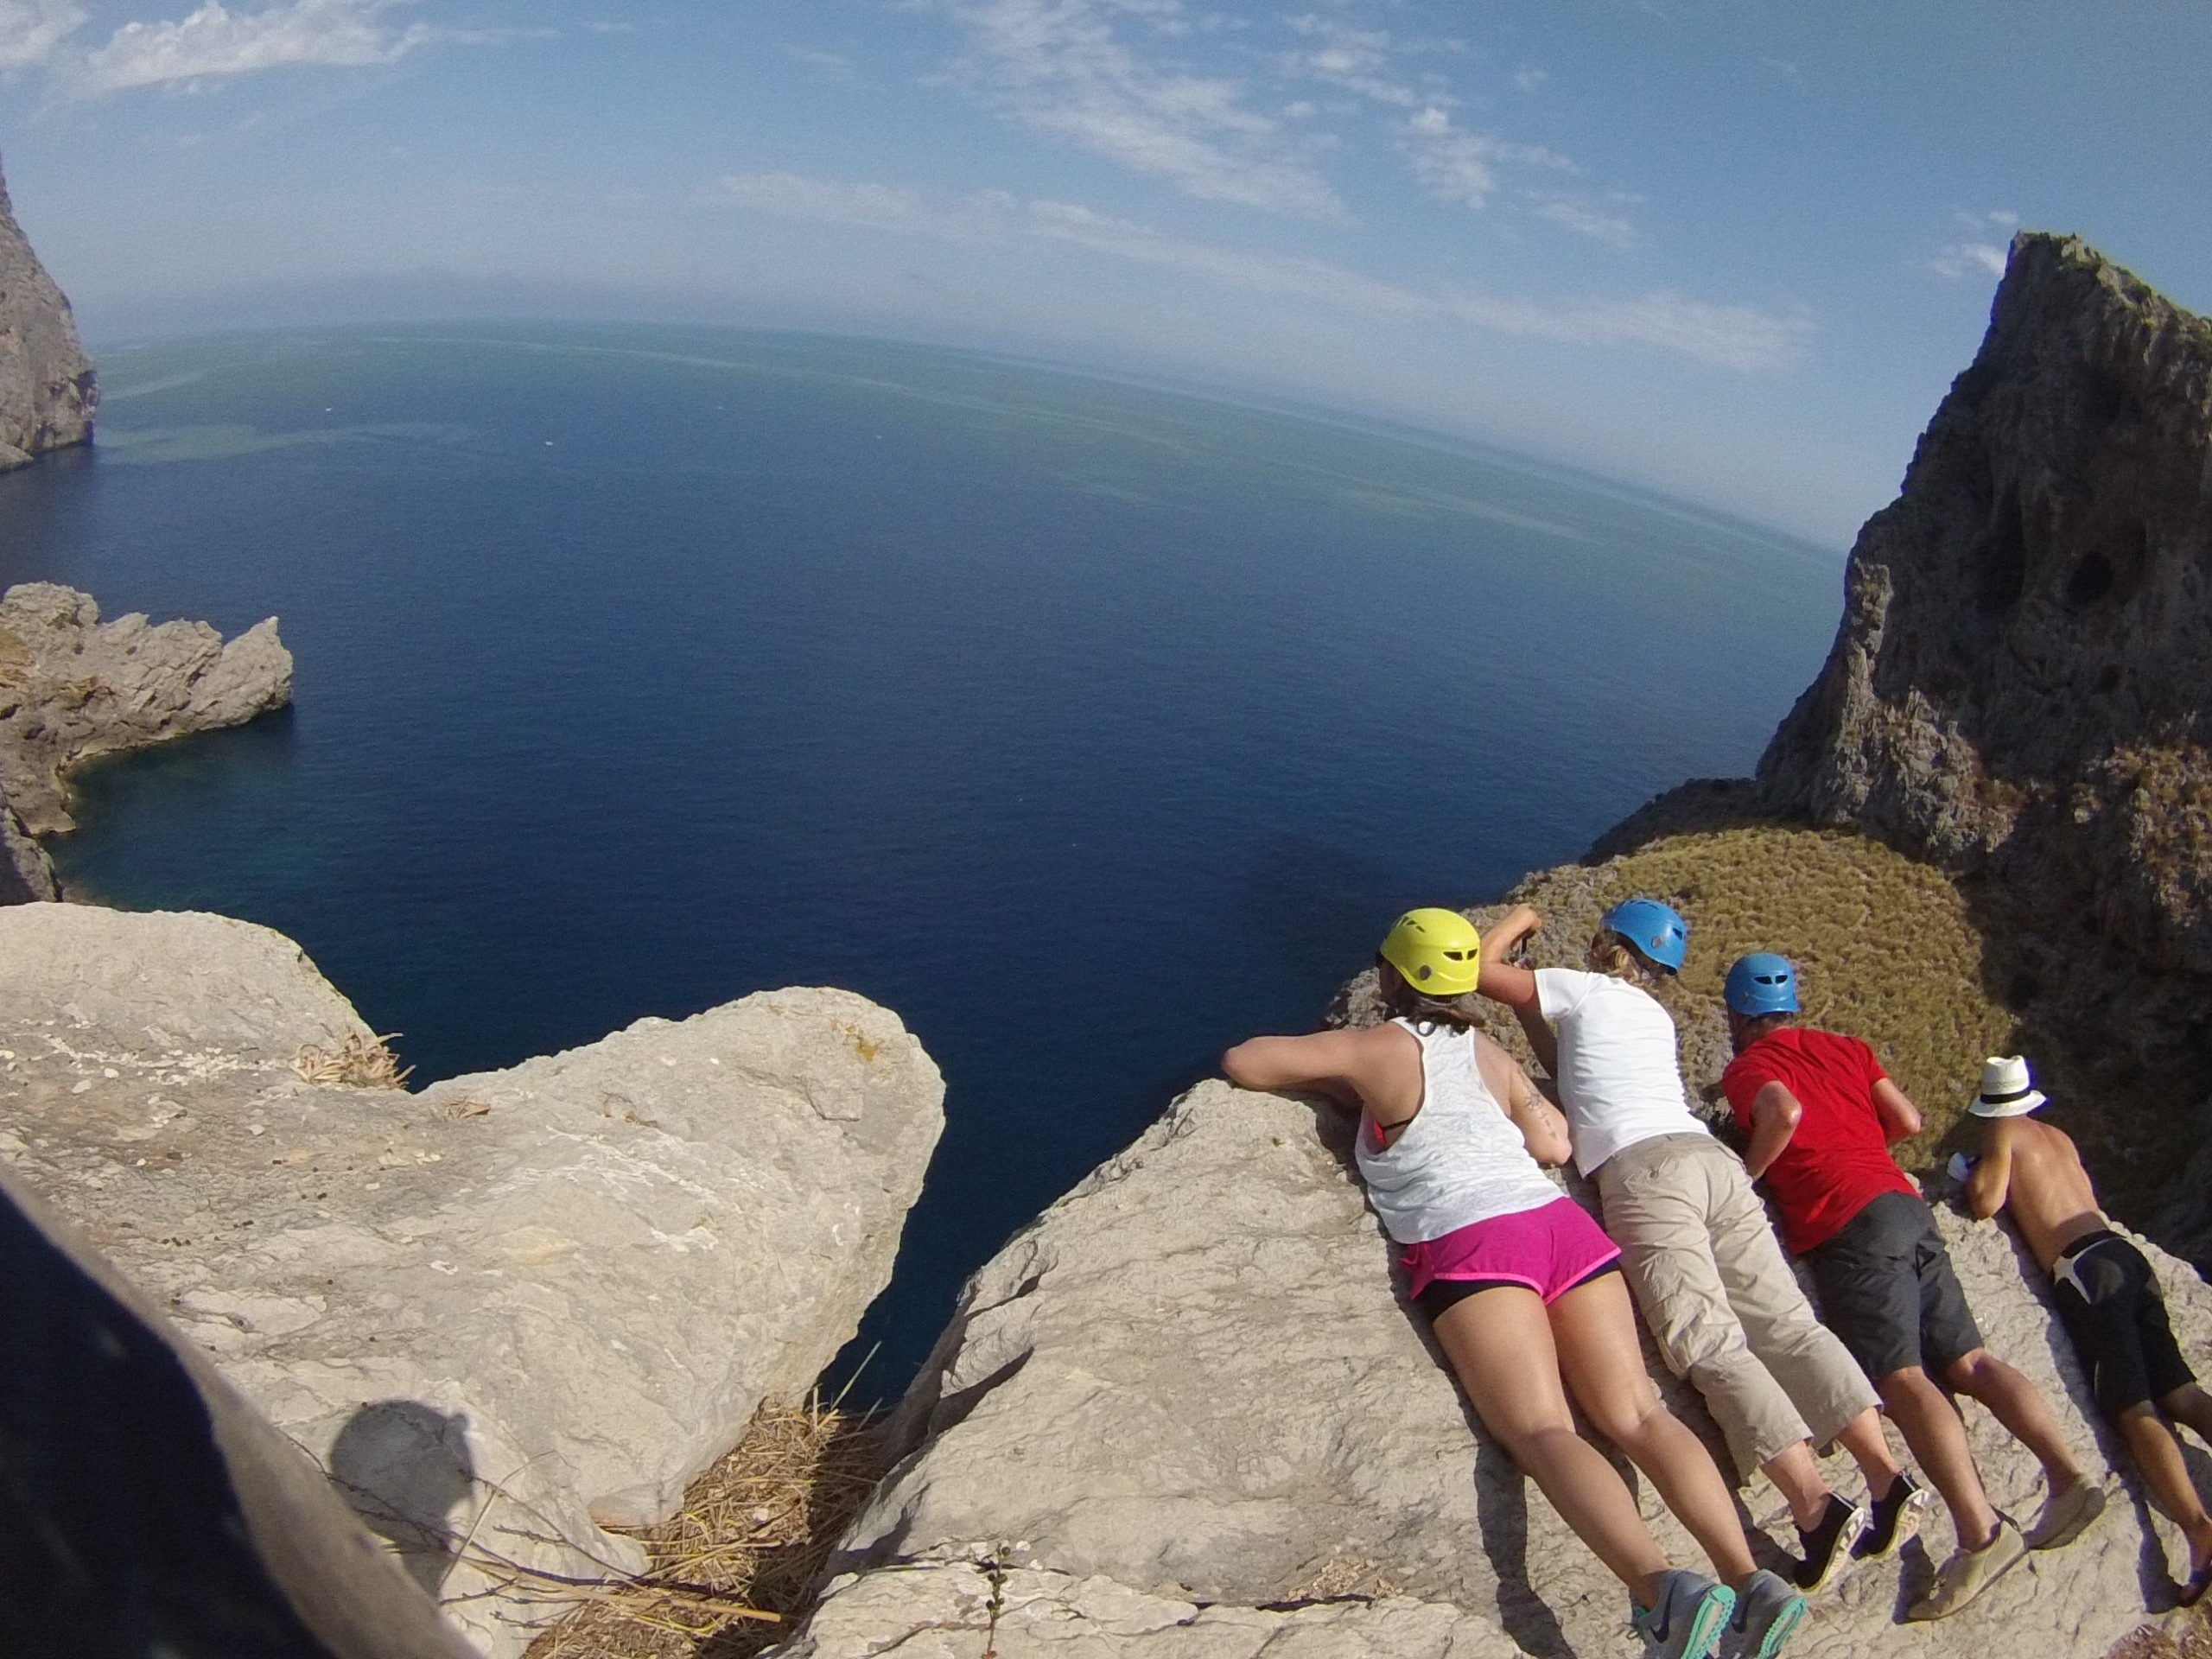 People on the edge of a cliff in Majorca